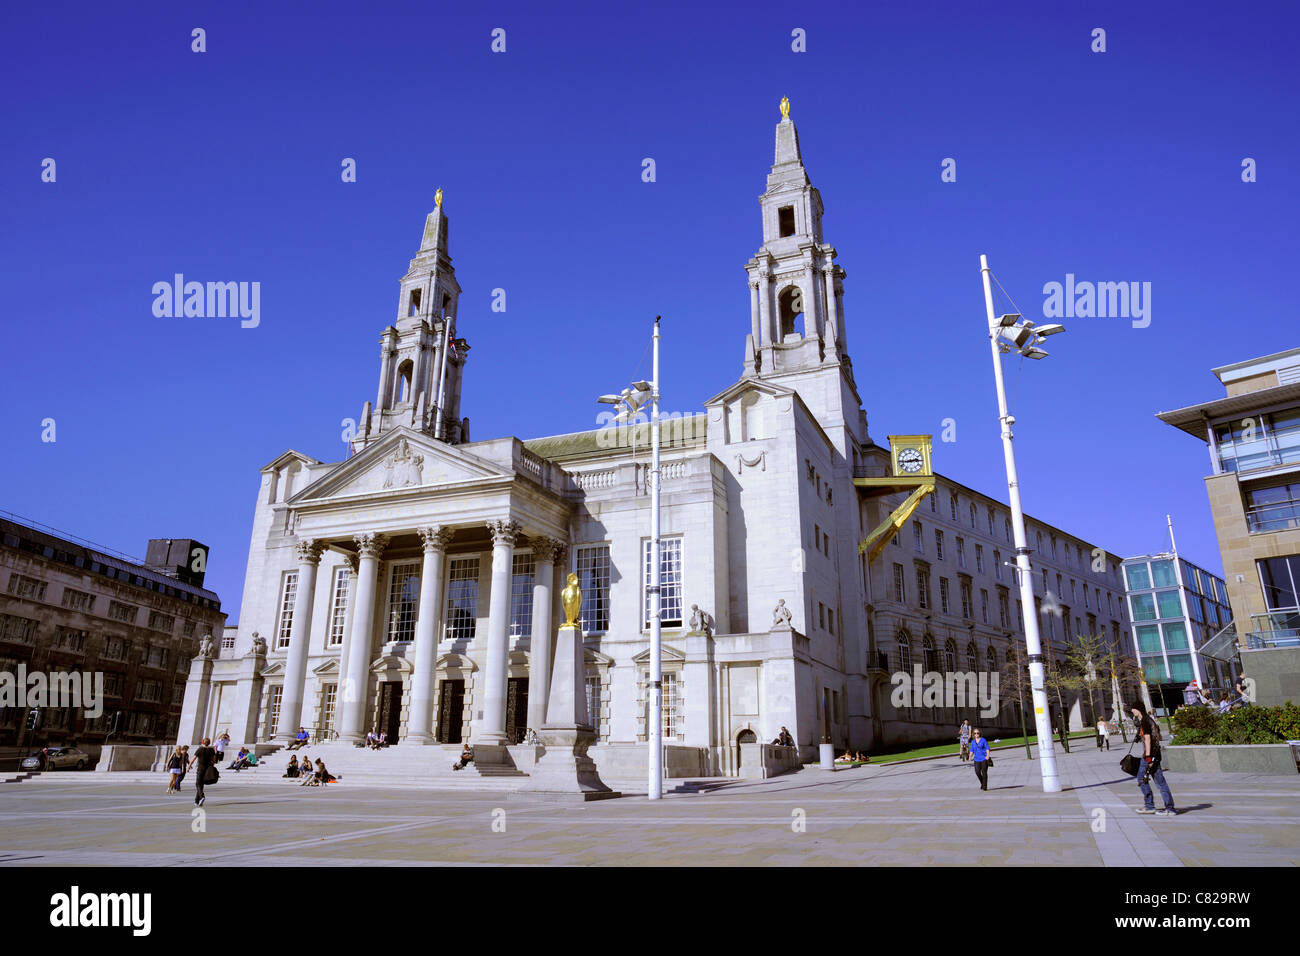 Leeds civic hall designed by vincent harris opened by King George V in 1933 Yorkshire UK Stock Photo